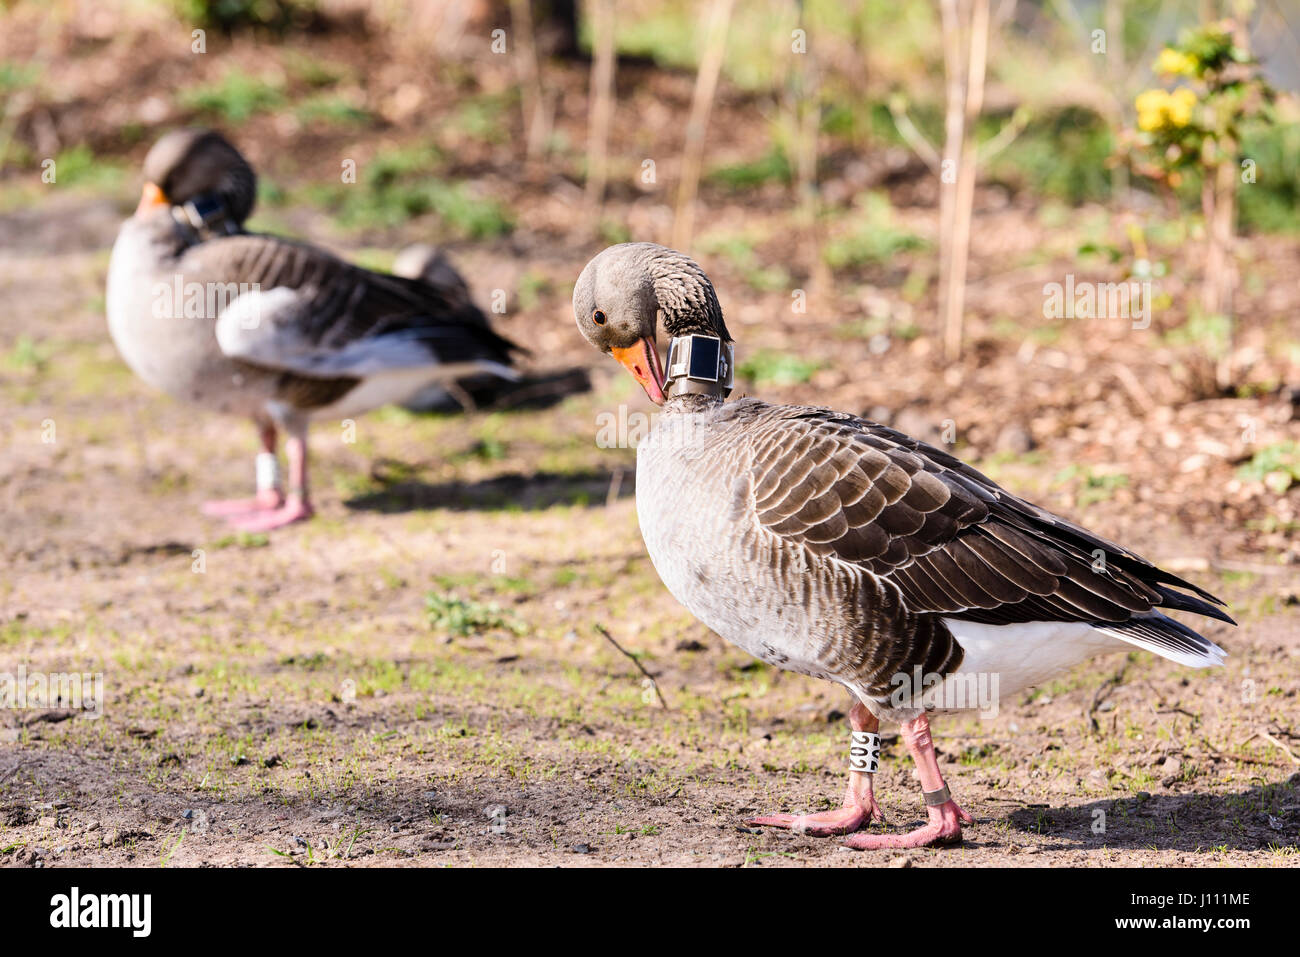 Greylag goose with a GPS tracker on its neck. Stock Photo